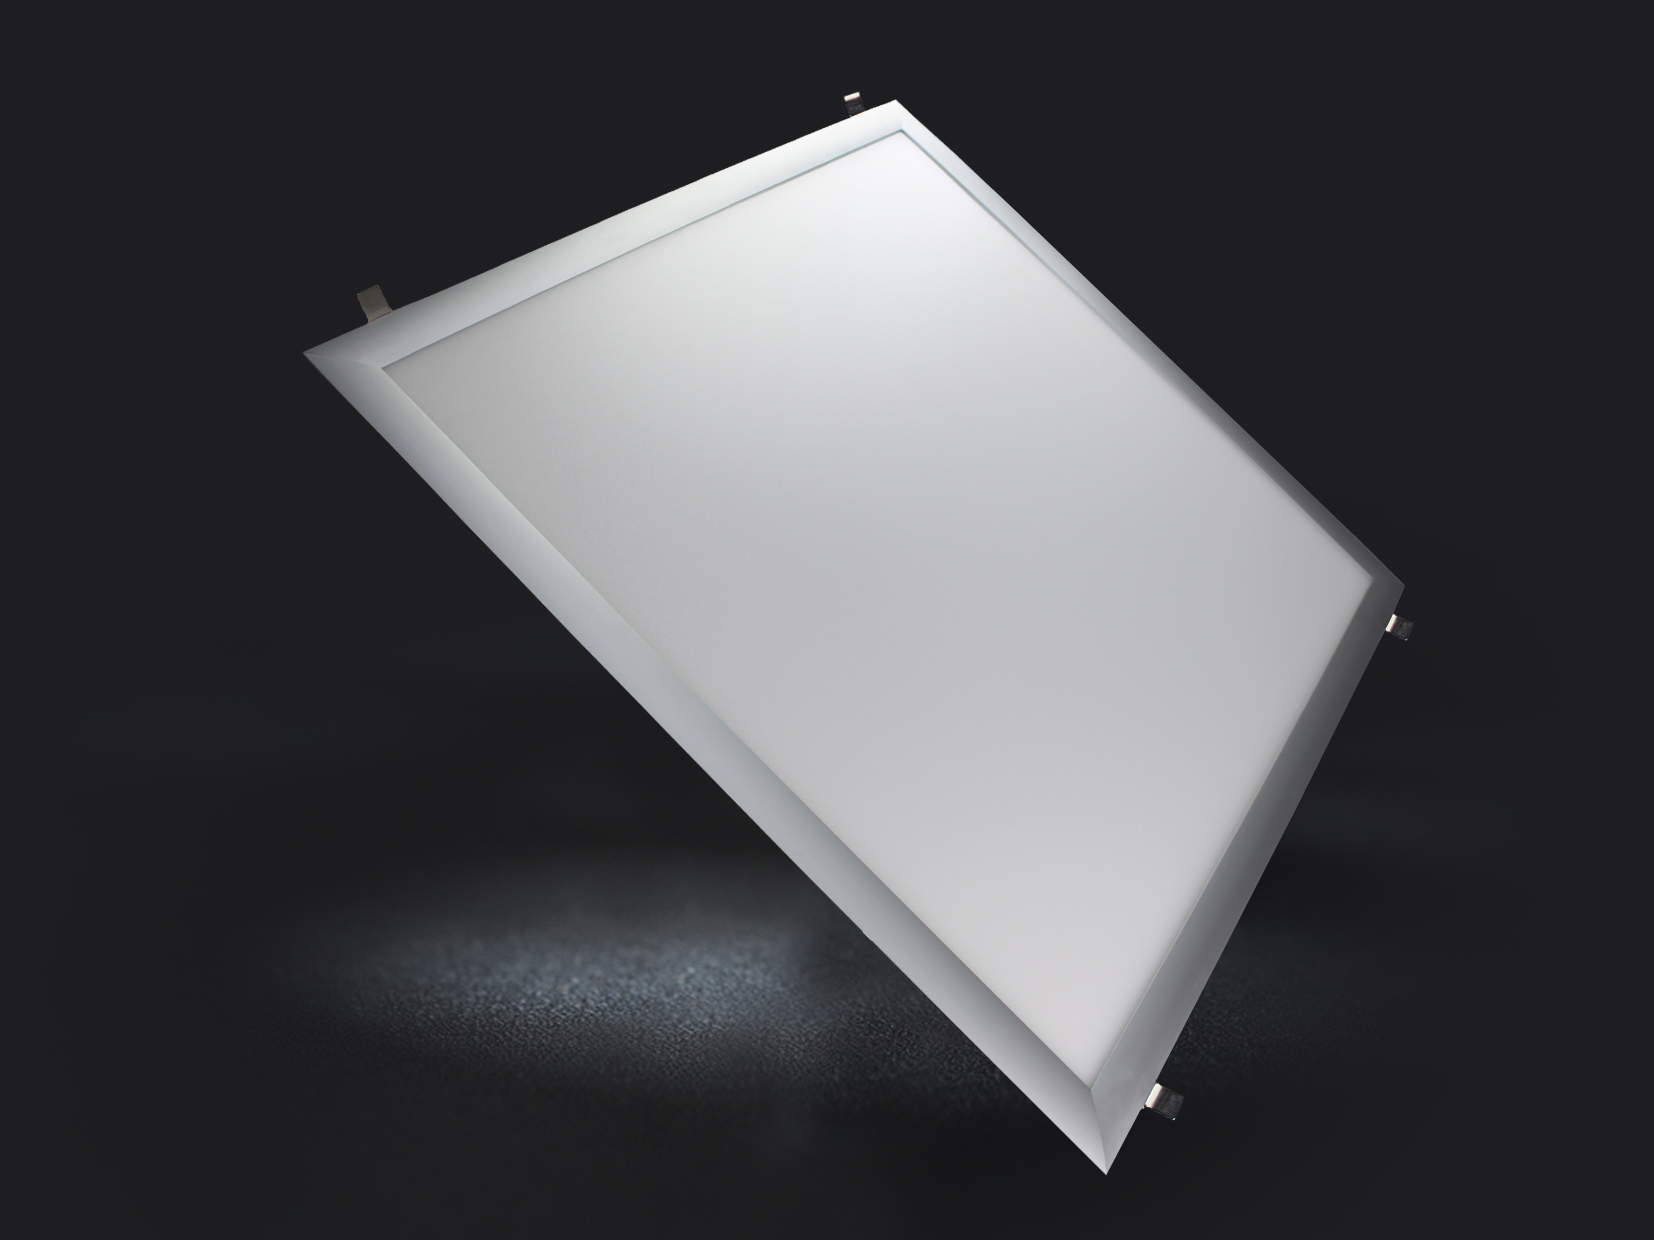 Make An Impression With The Classy LED Ceiling Panel Lights | Warisan